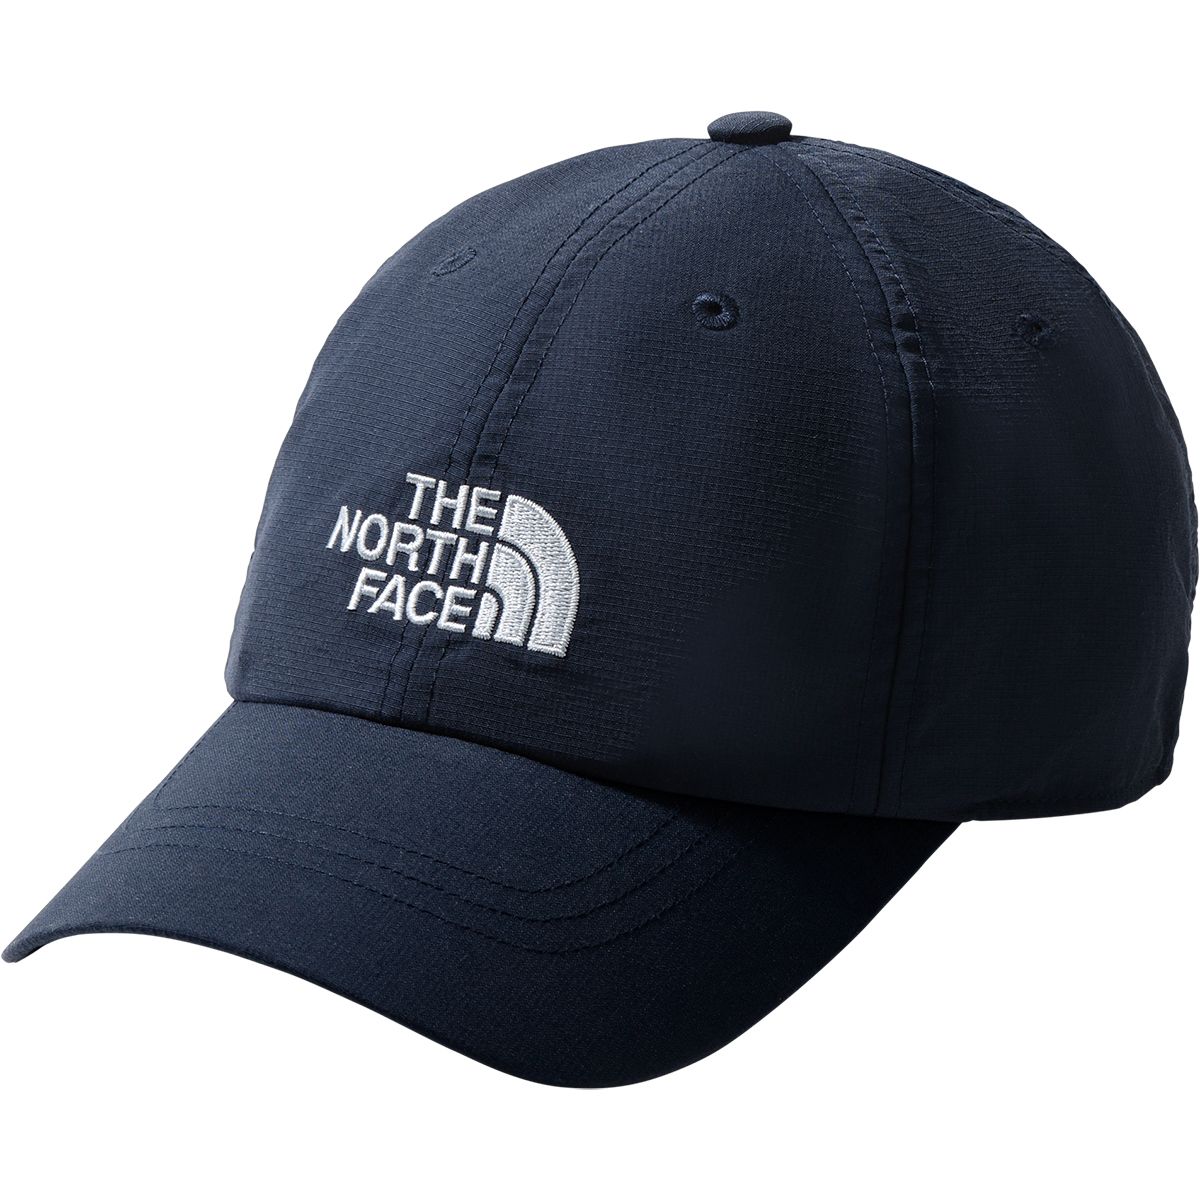 The North Face Horizon Hat | Backcountry.com